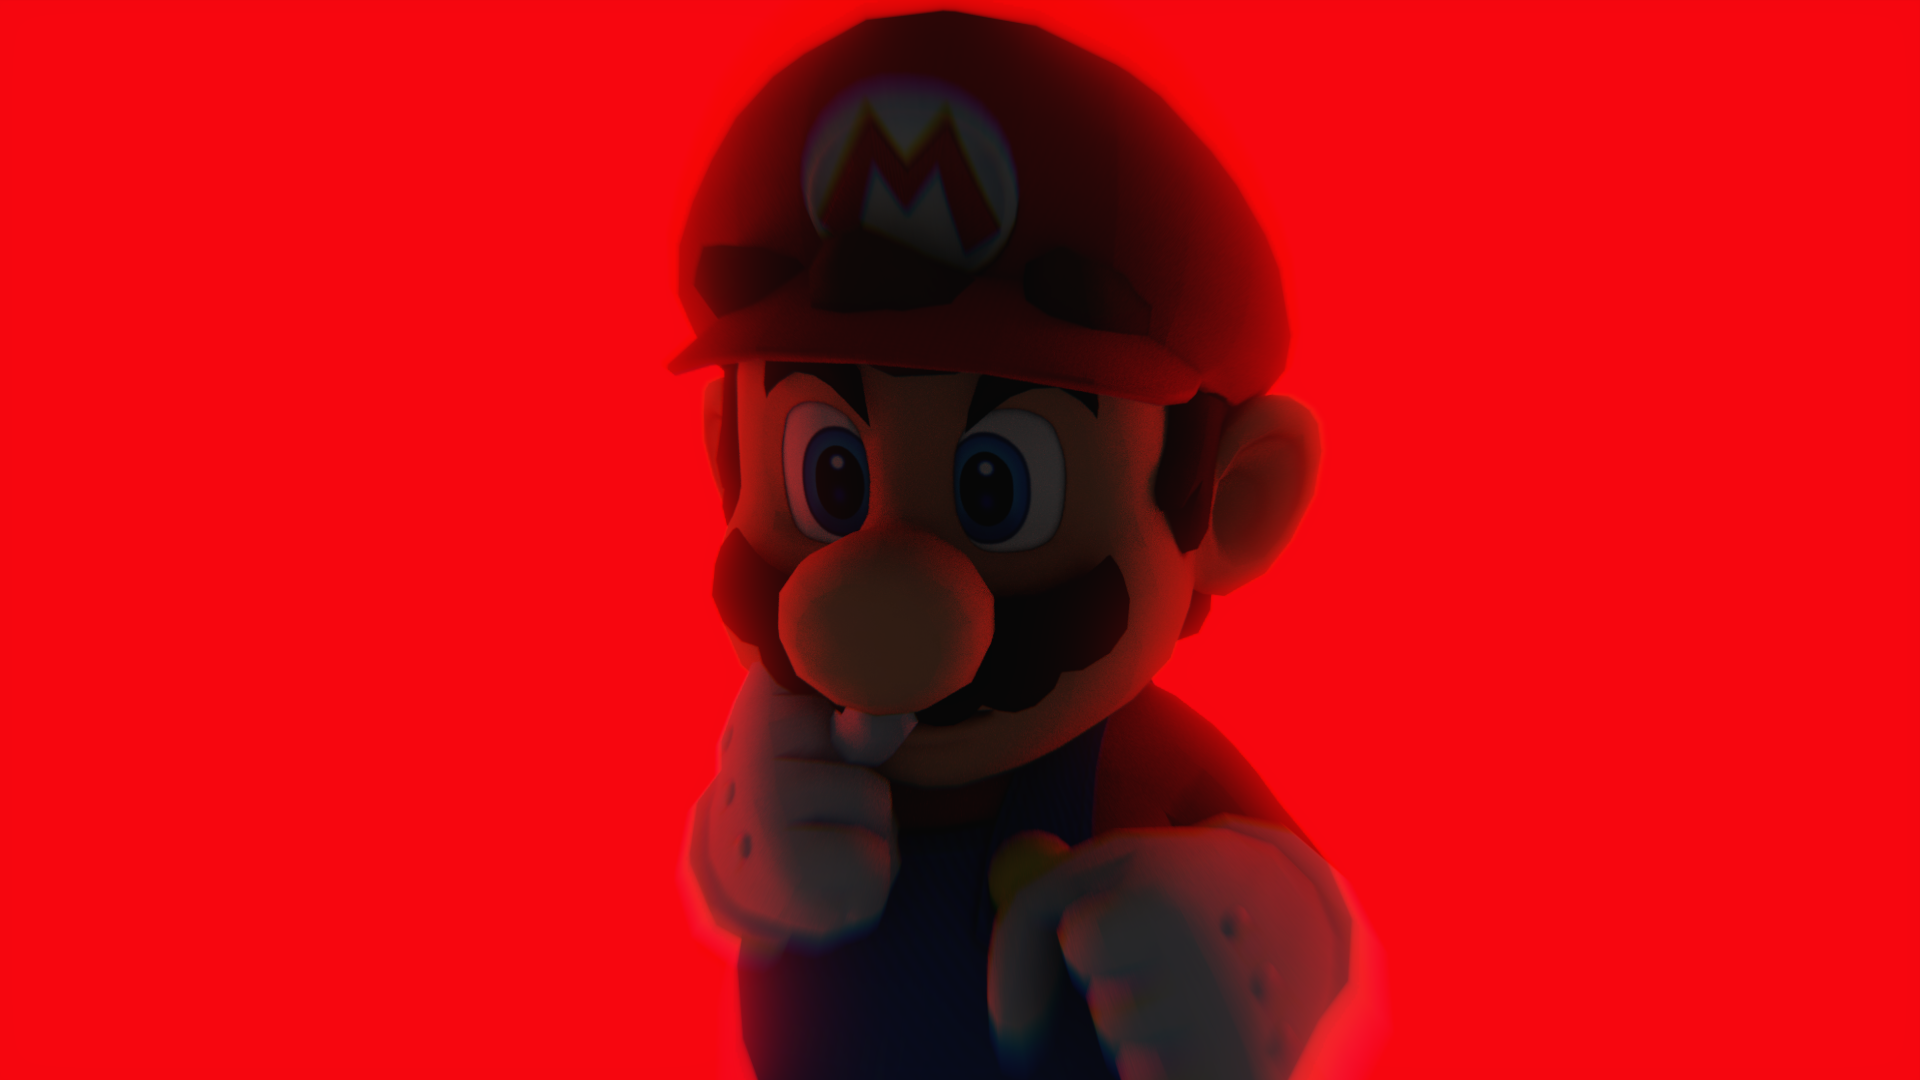 mario in animatronic horror download pc now free please im begging no more videos please